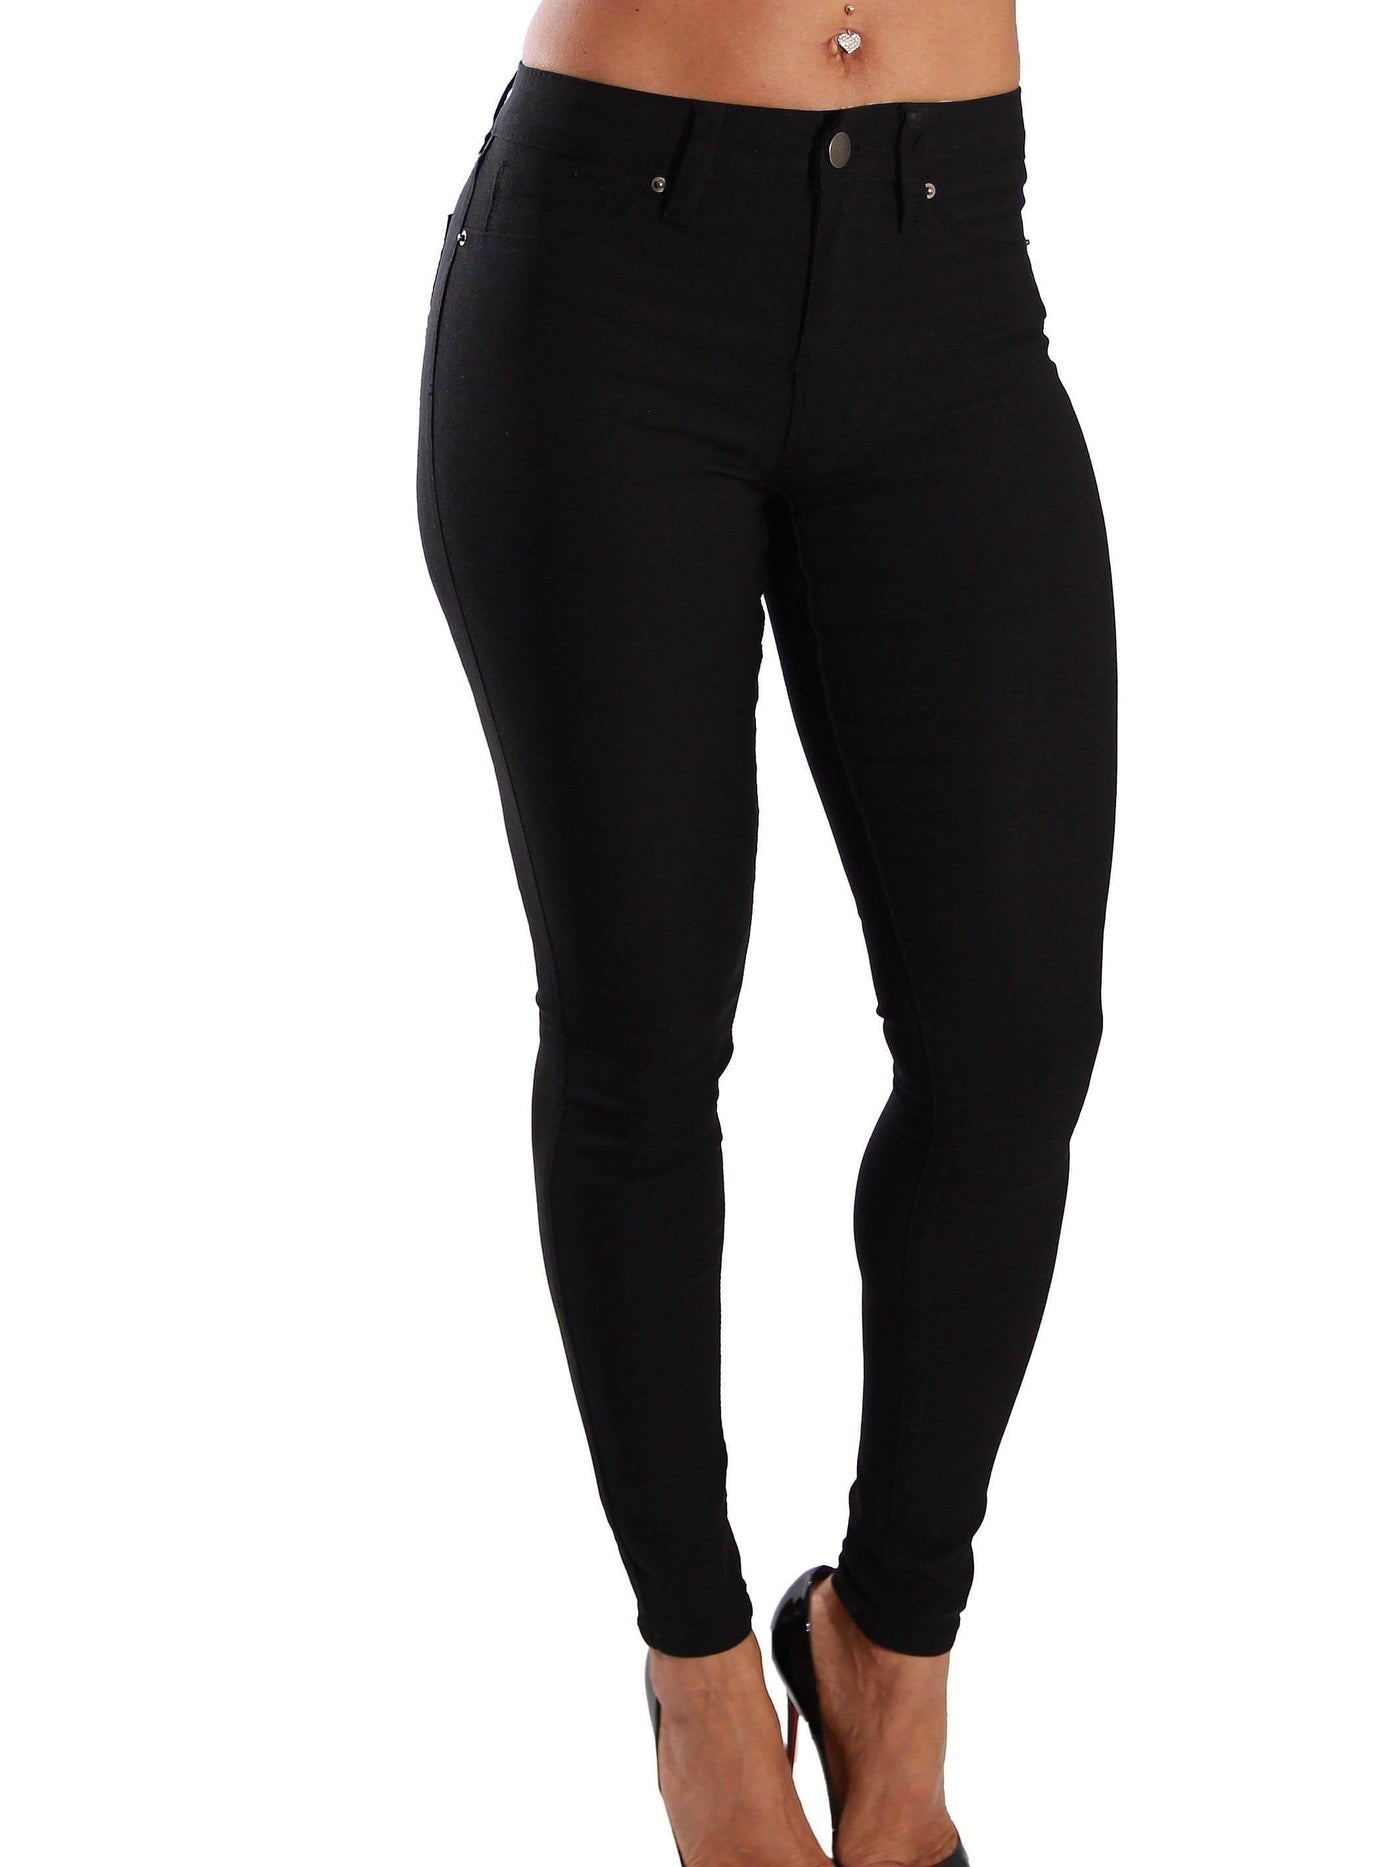 Get Stretchy | Skinny Pants Black SIZE X-LARGE - Statement Piece NY _tab_final-sale, _tab_size-chart, Black, Bottoms, Brooklyn Boutique, clearance, Fall, Fall Fashion, final, final sale, Last One, Long Pants, Misses, Monochrome, pants, Ships from USA, Skinny Fit, small, SPNY Exclusive, Standard Fall, statement, Statement Clothing, statement piece, Statement Piece Boutique, statement piece ny, Statement Pieces, Statement Pieces Boutique, Women's Boutique, Workwear, X-Large, XL Pants